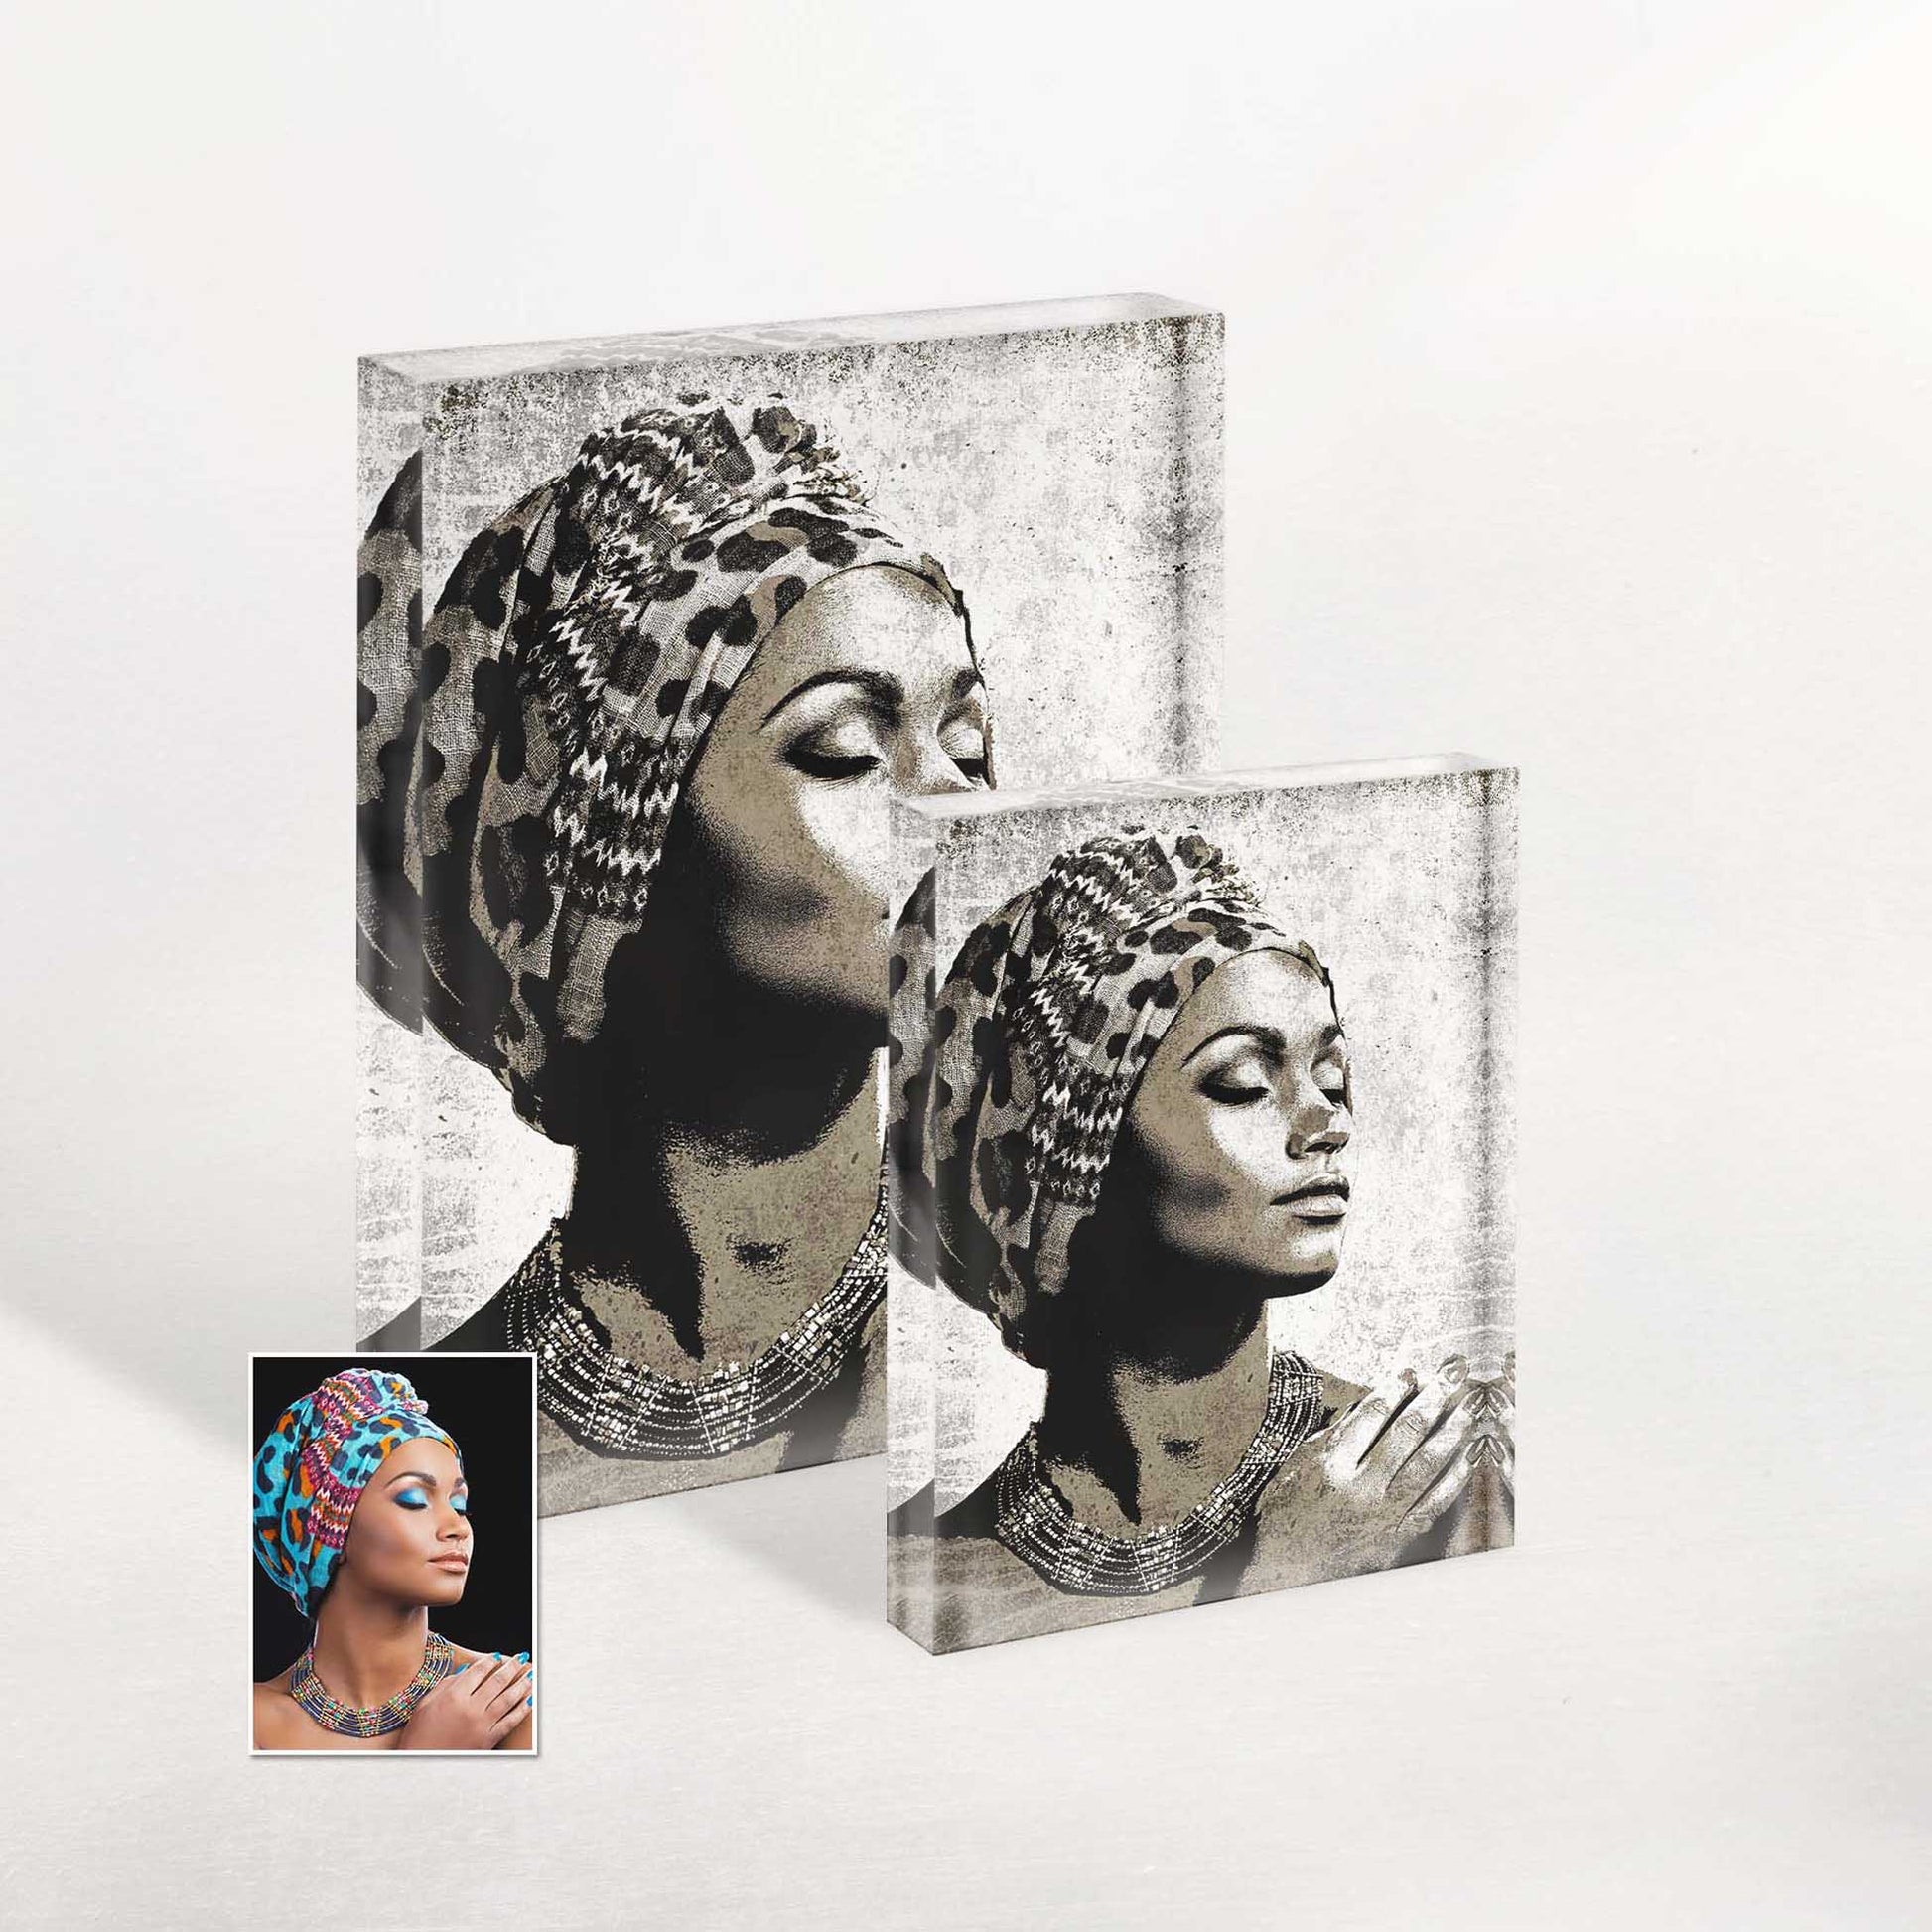 Personalised Black and White Street Art Acrylic Block Photo: A Unique Anniversary or Wedding Gift. Celebrate love and style with our chic and minimalist street art pieces